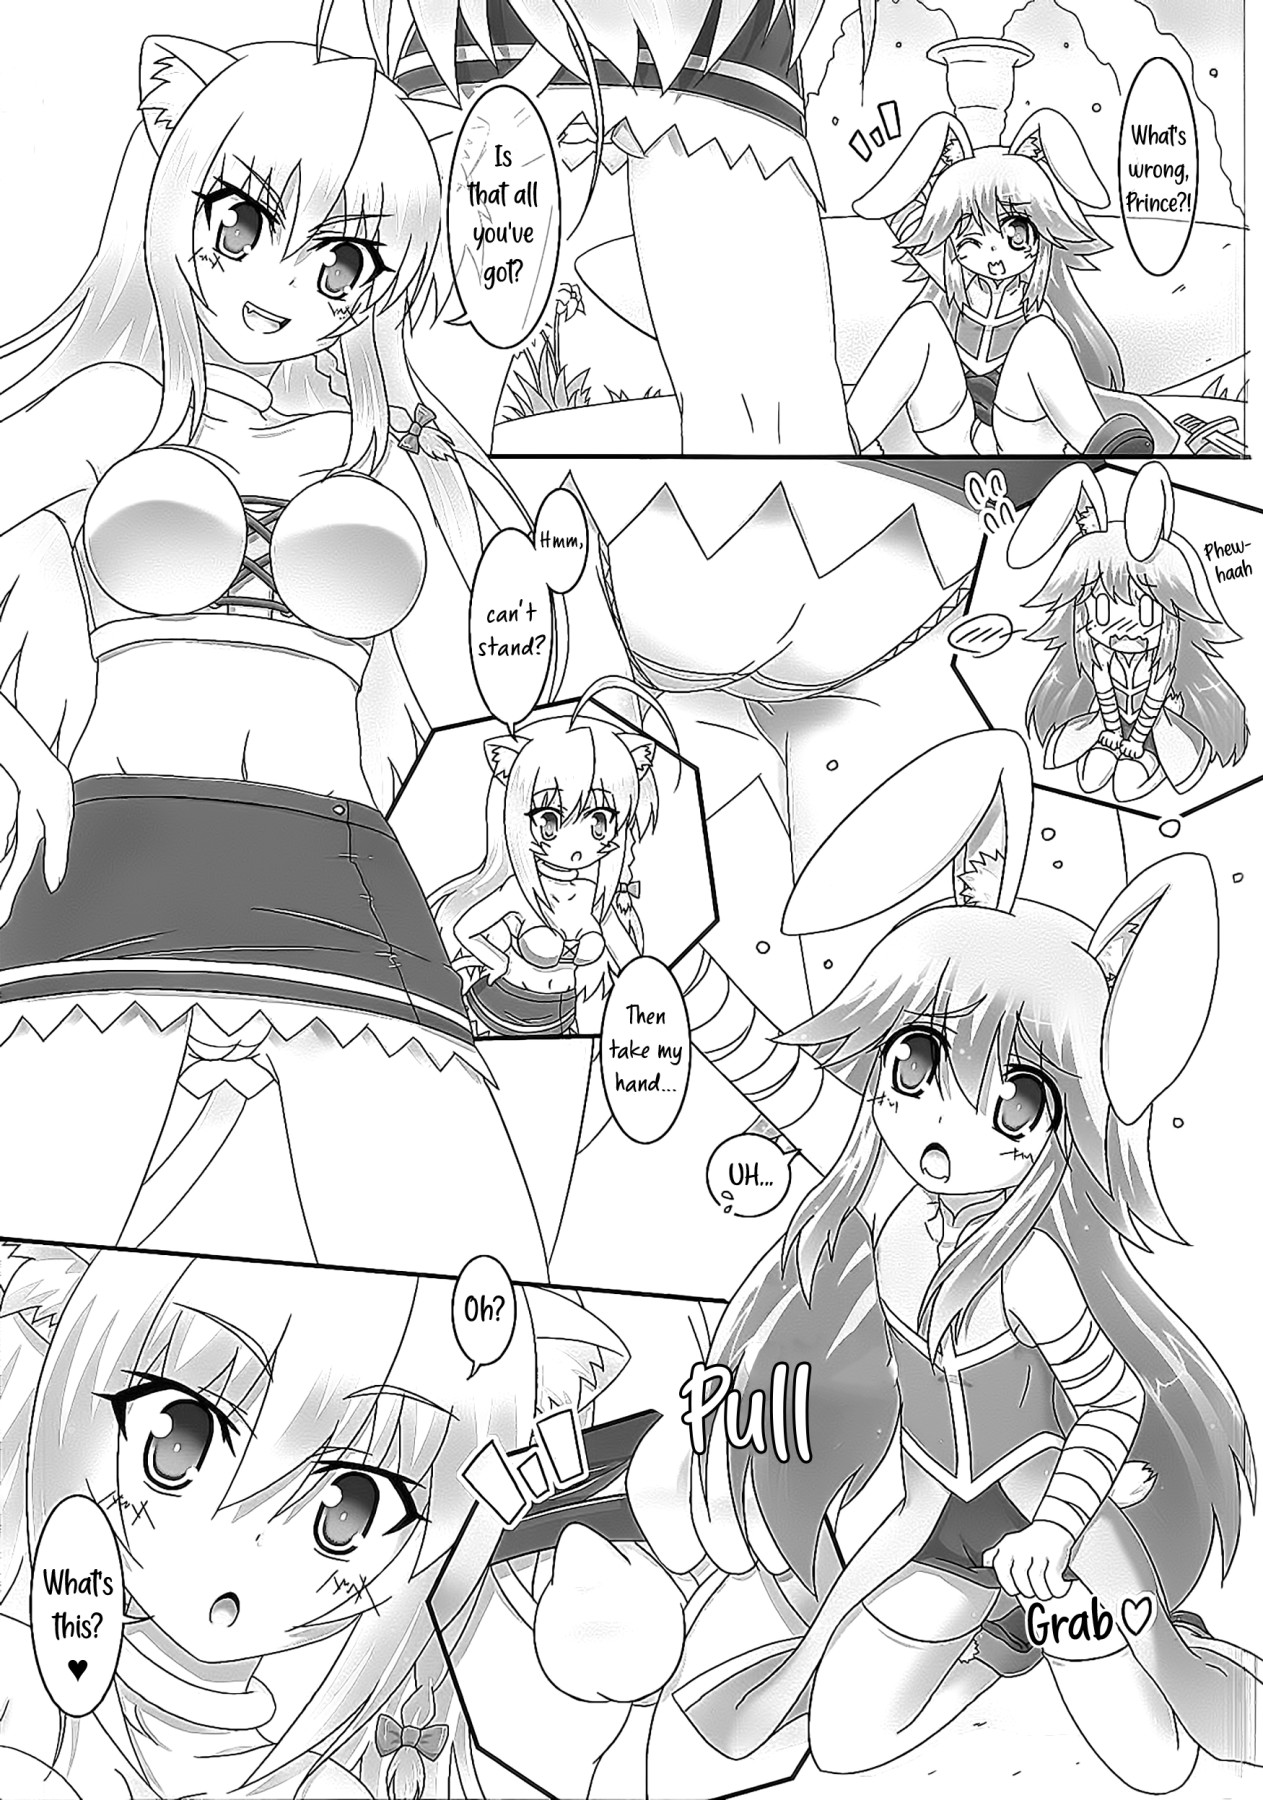 Hentai Manga Comic-A Book Where the Bunny-Ear Prince Is Taught Not Just the Sword But Also XX-Read-2